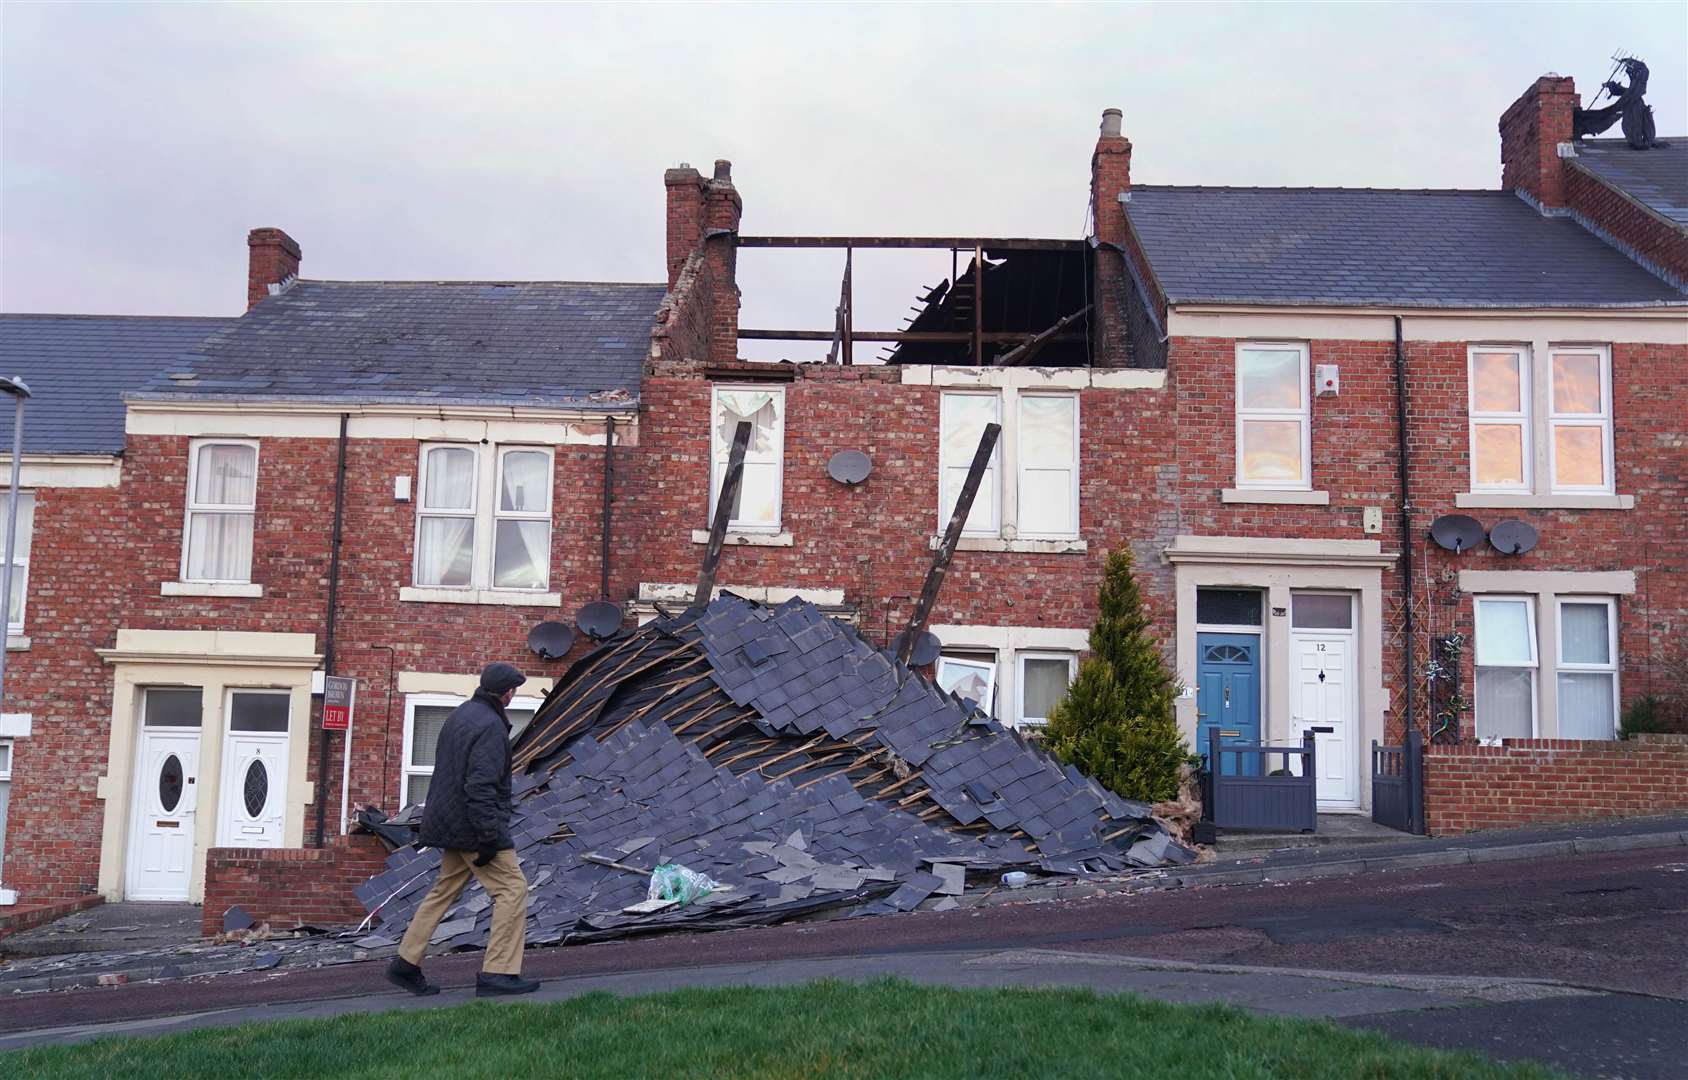 A house on Overhill terrace in Bensham, Gateshead, which lost its roof during Storm Malik (Owen Humphreys/PA)